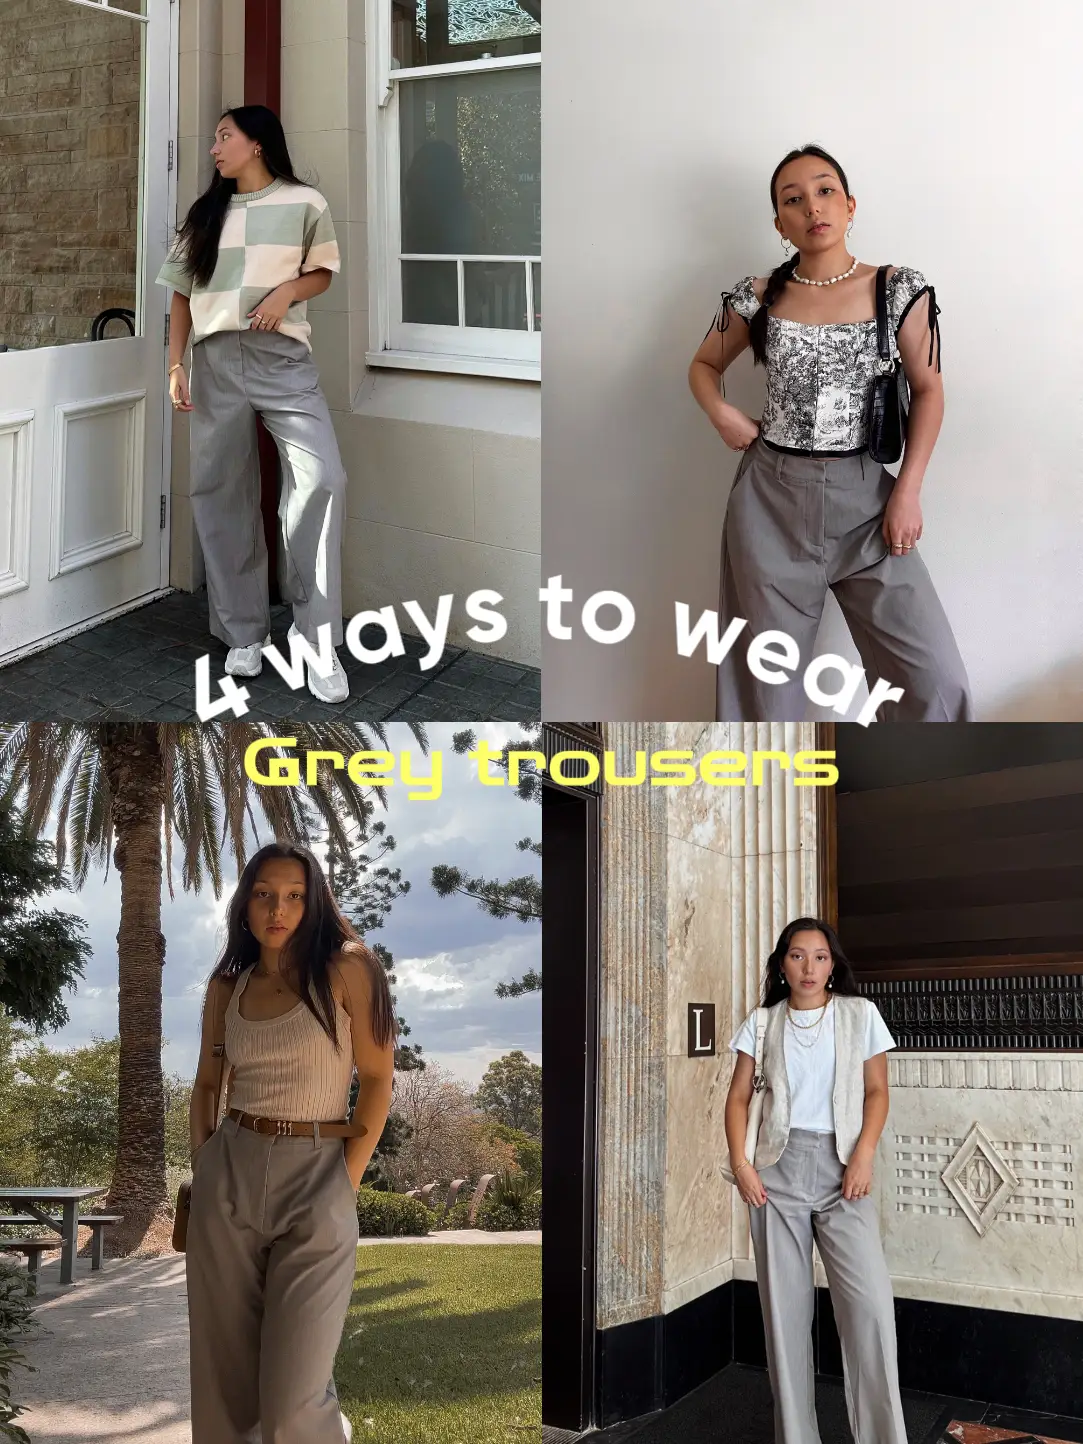 How To Wear Leggings To Work Outfits Grey 58 Super Ideas, #Grey